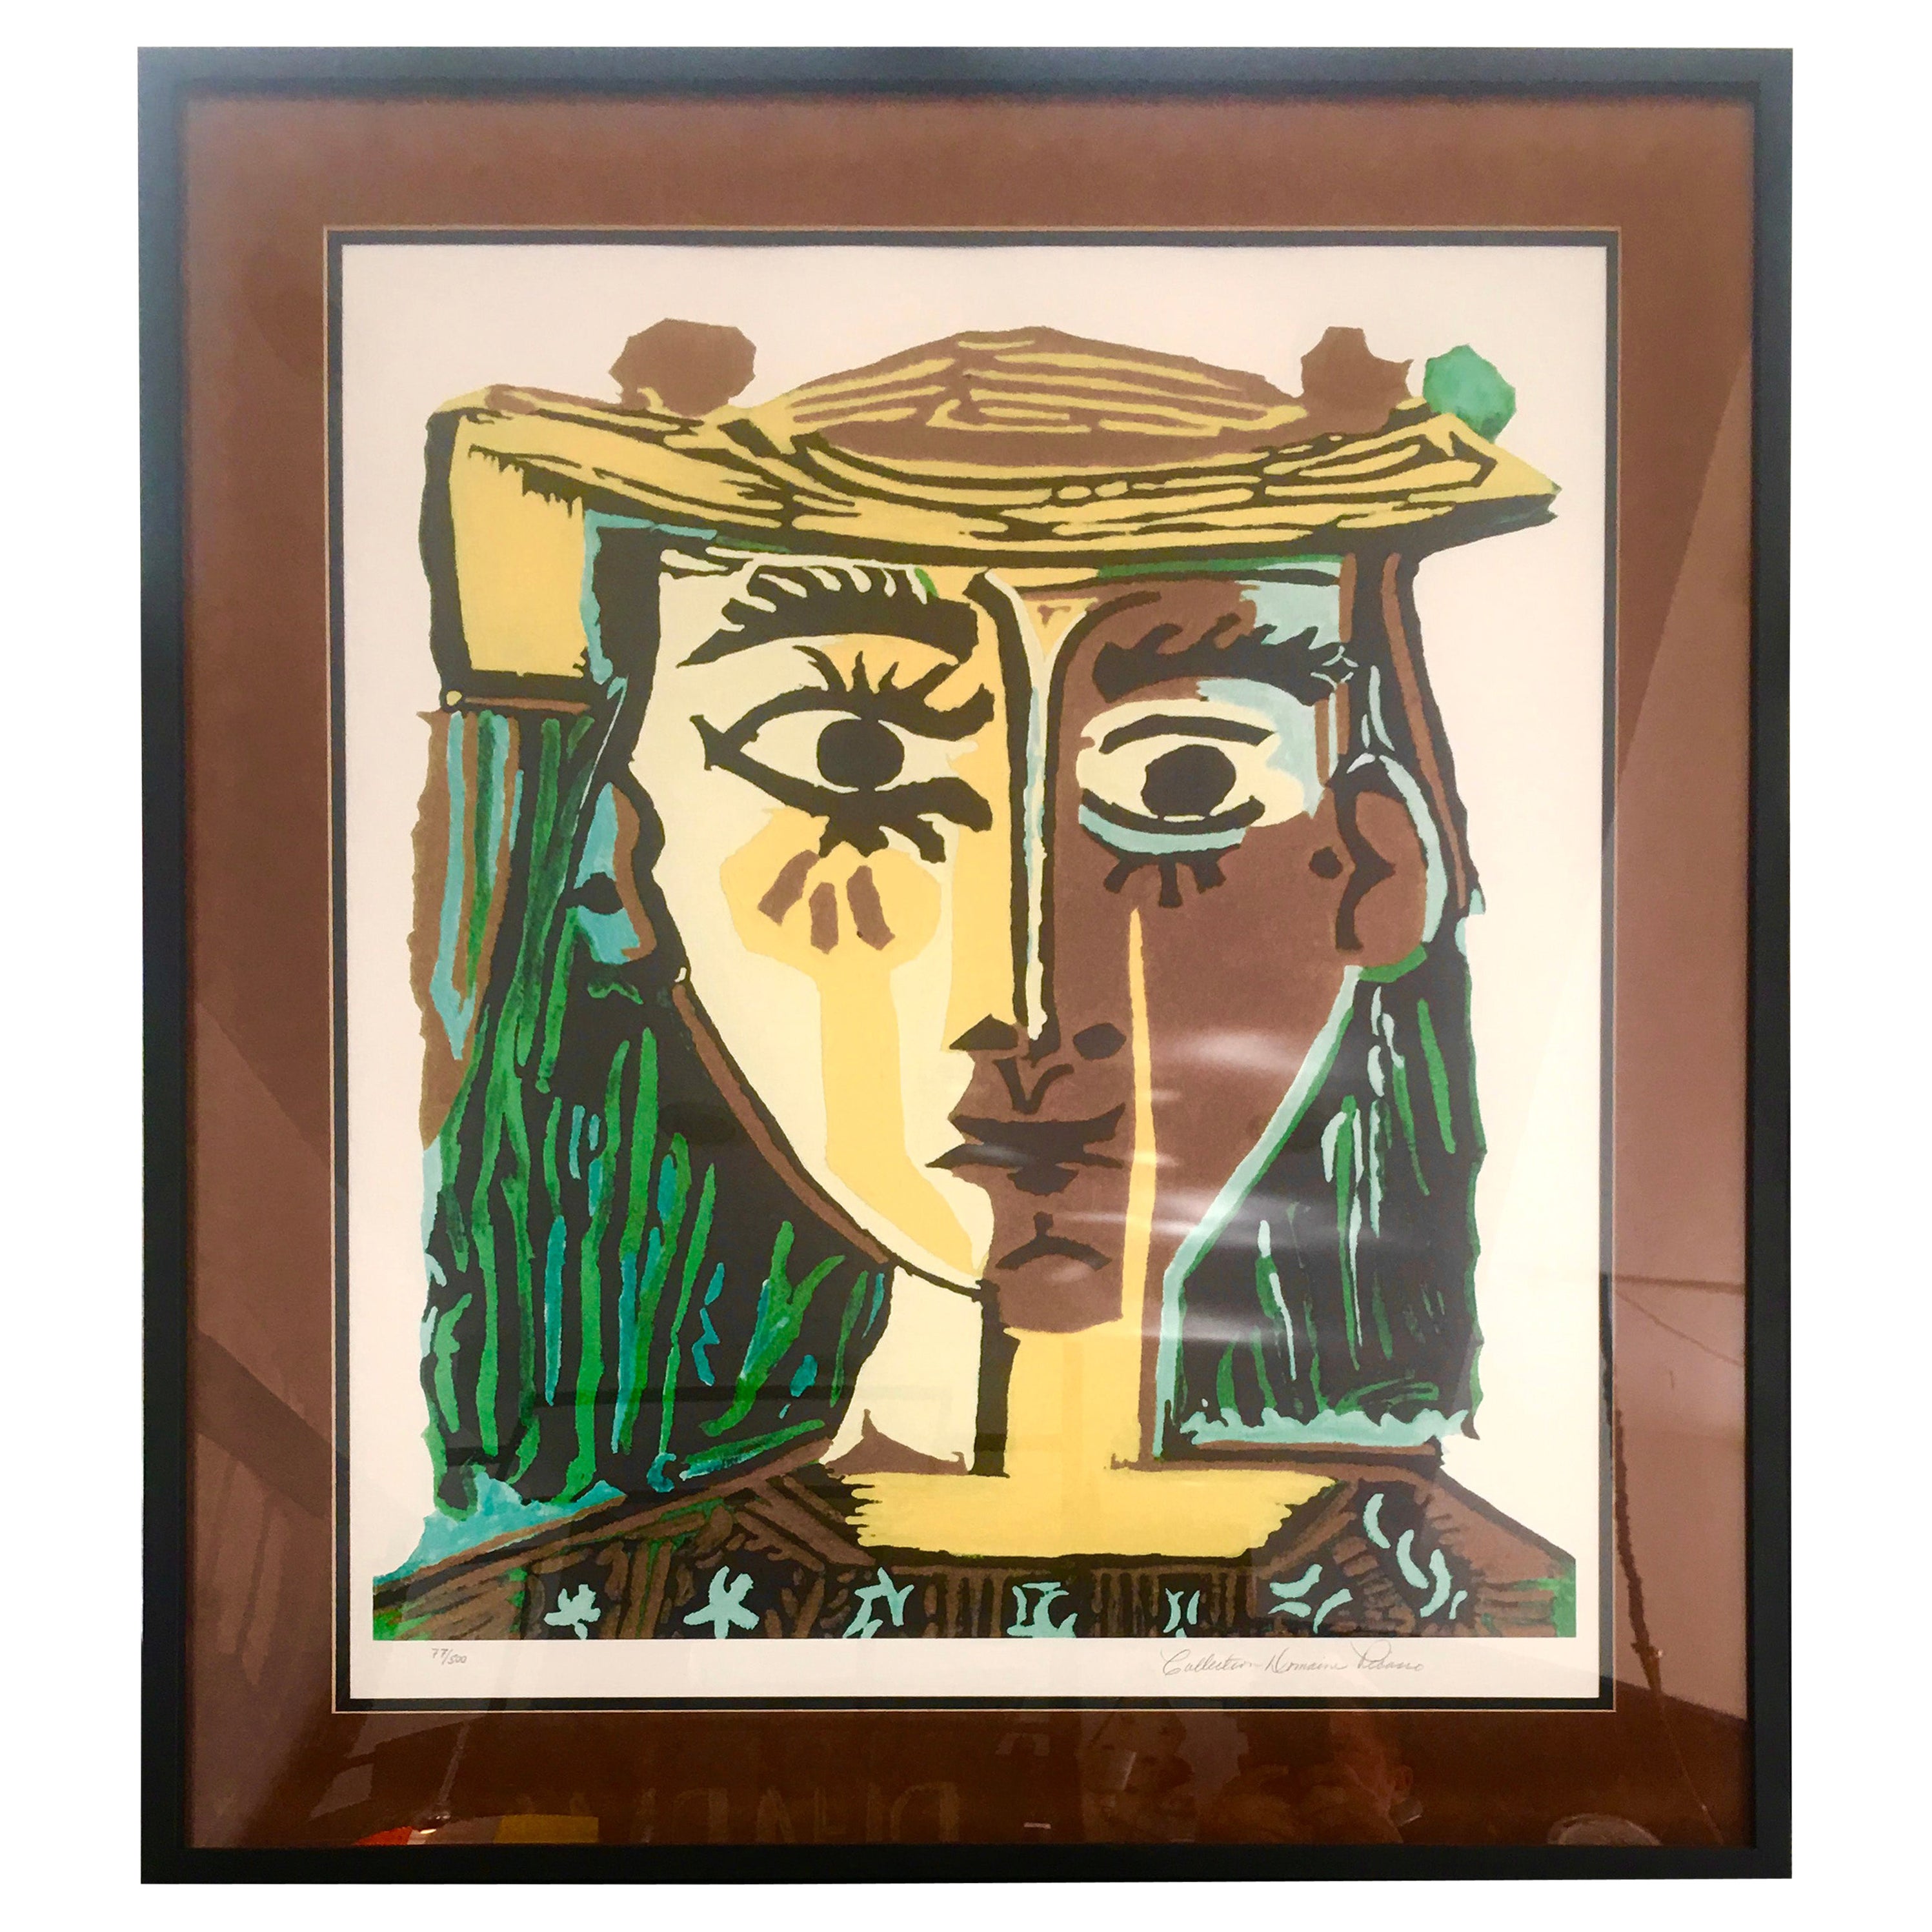 Eames Era Framed vintage 1950 Picasso White Lithograph on Black Board Mid Century Modern. Art print by Pablo Picasso